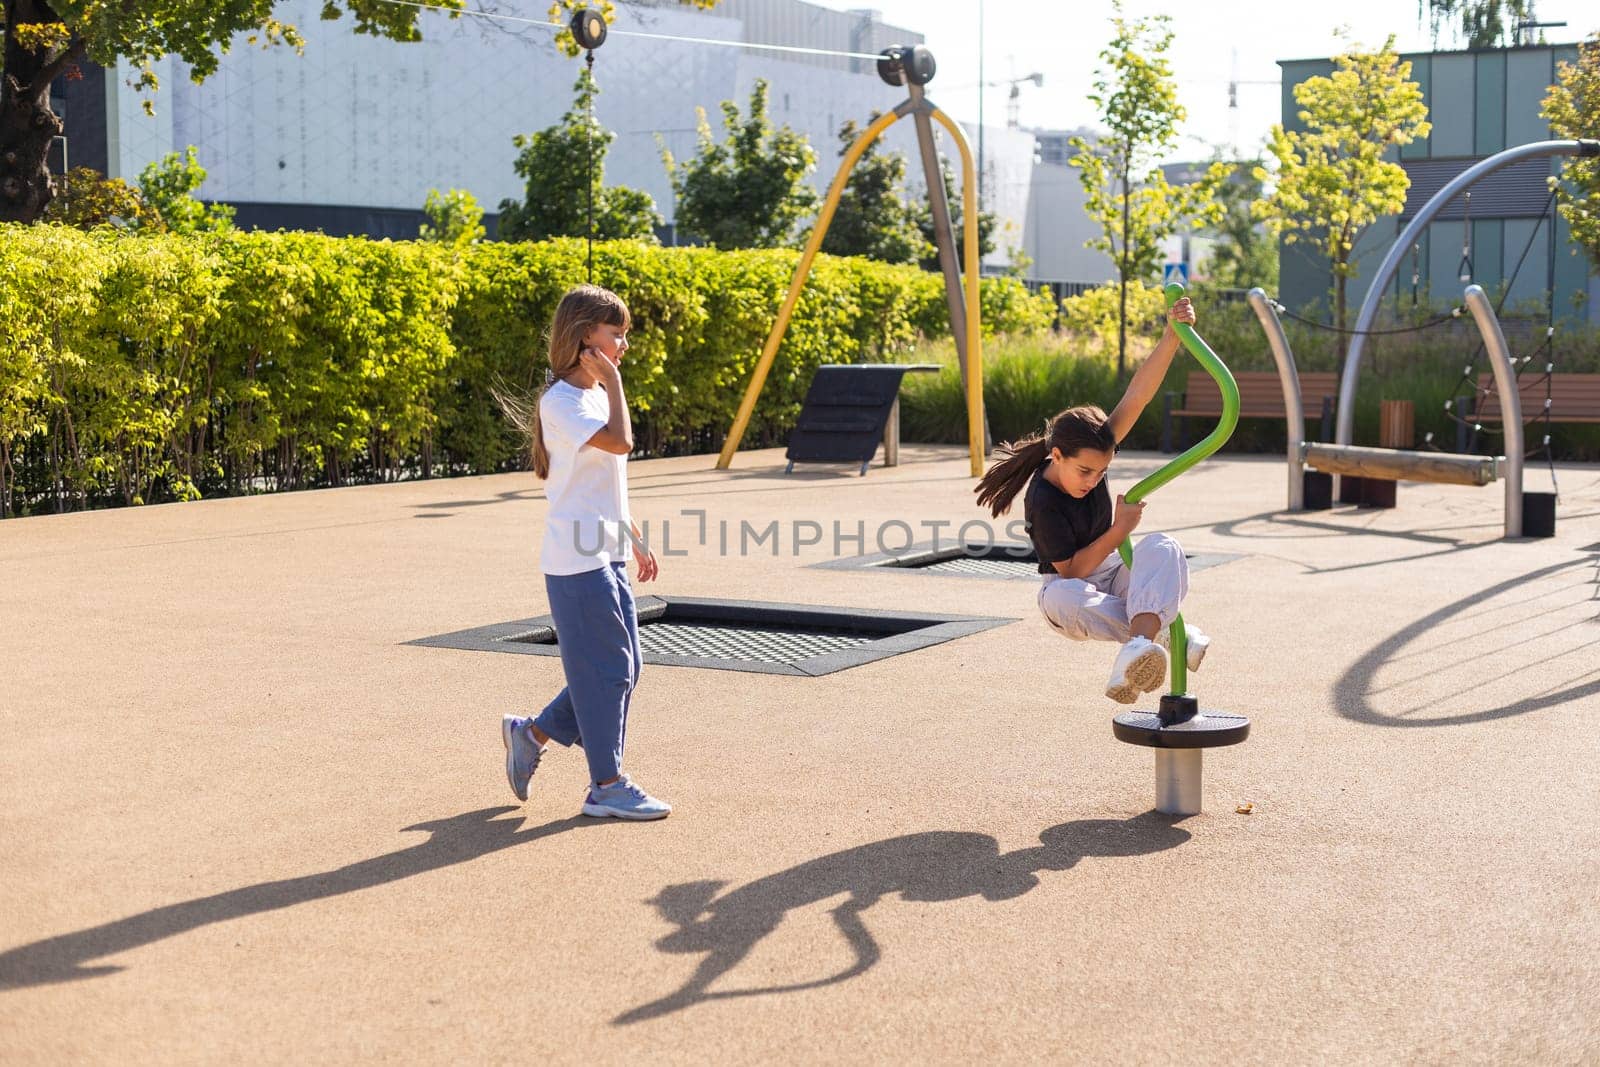 Two children spining on carousel and laughing loudly, hanging out, having fun in playground. happy activities. High quality photo